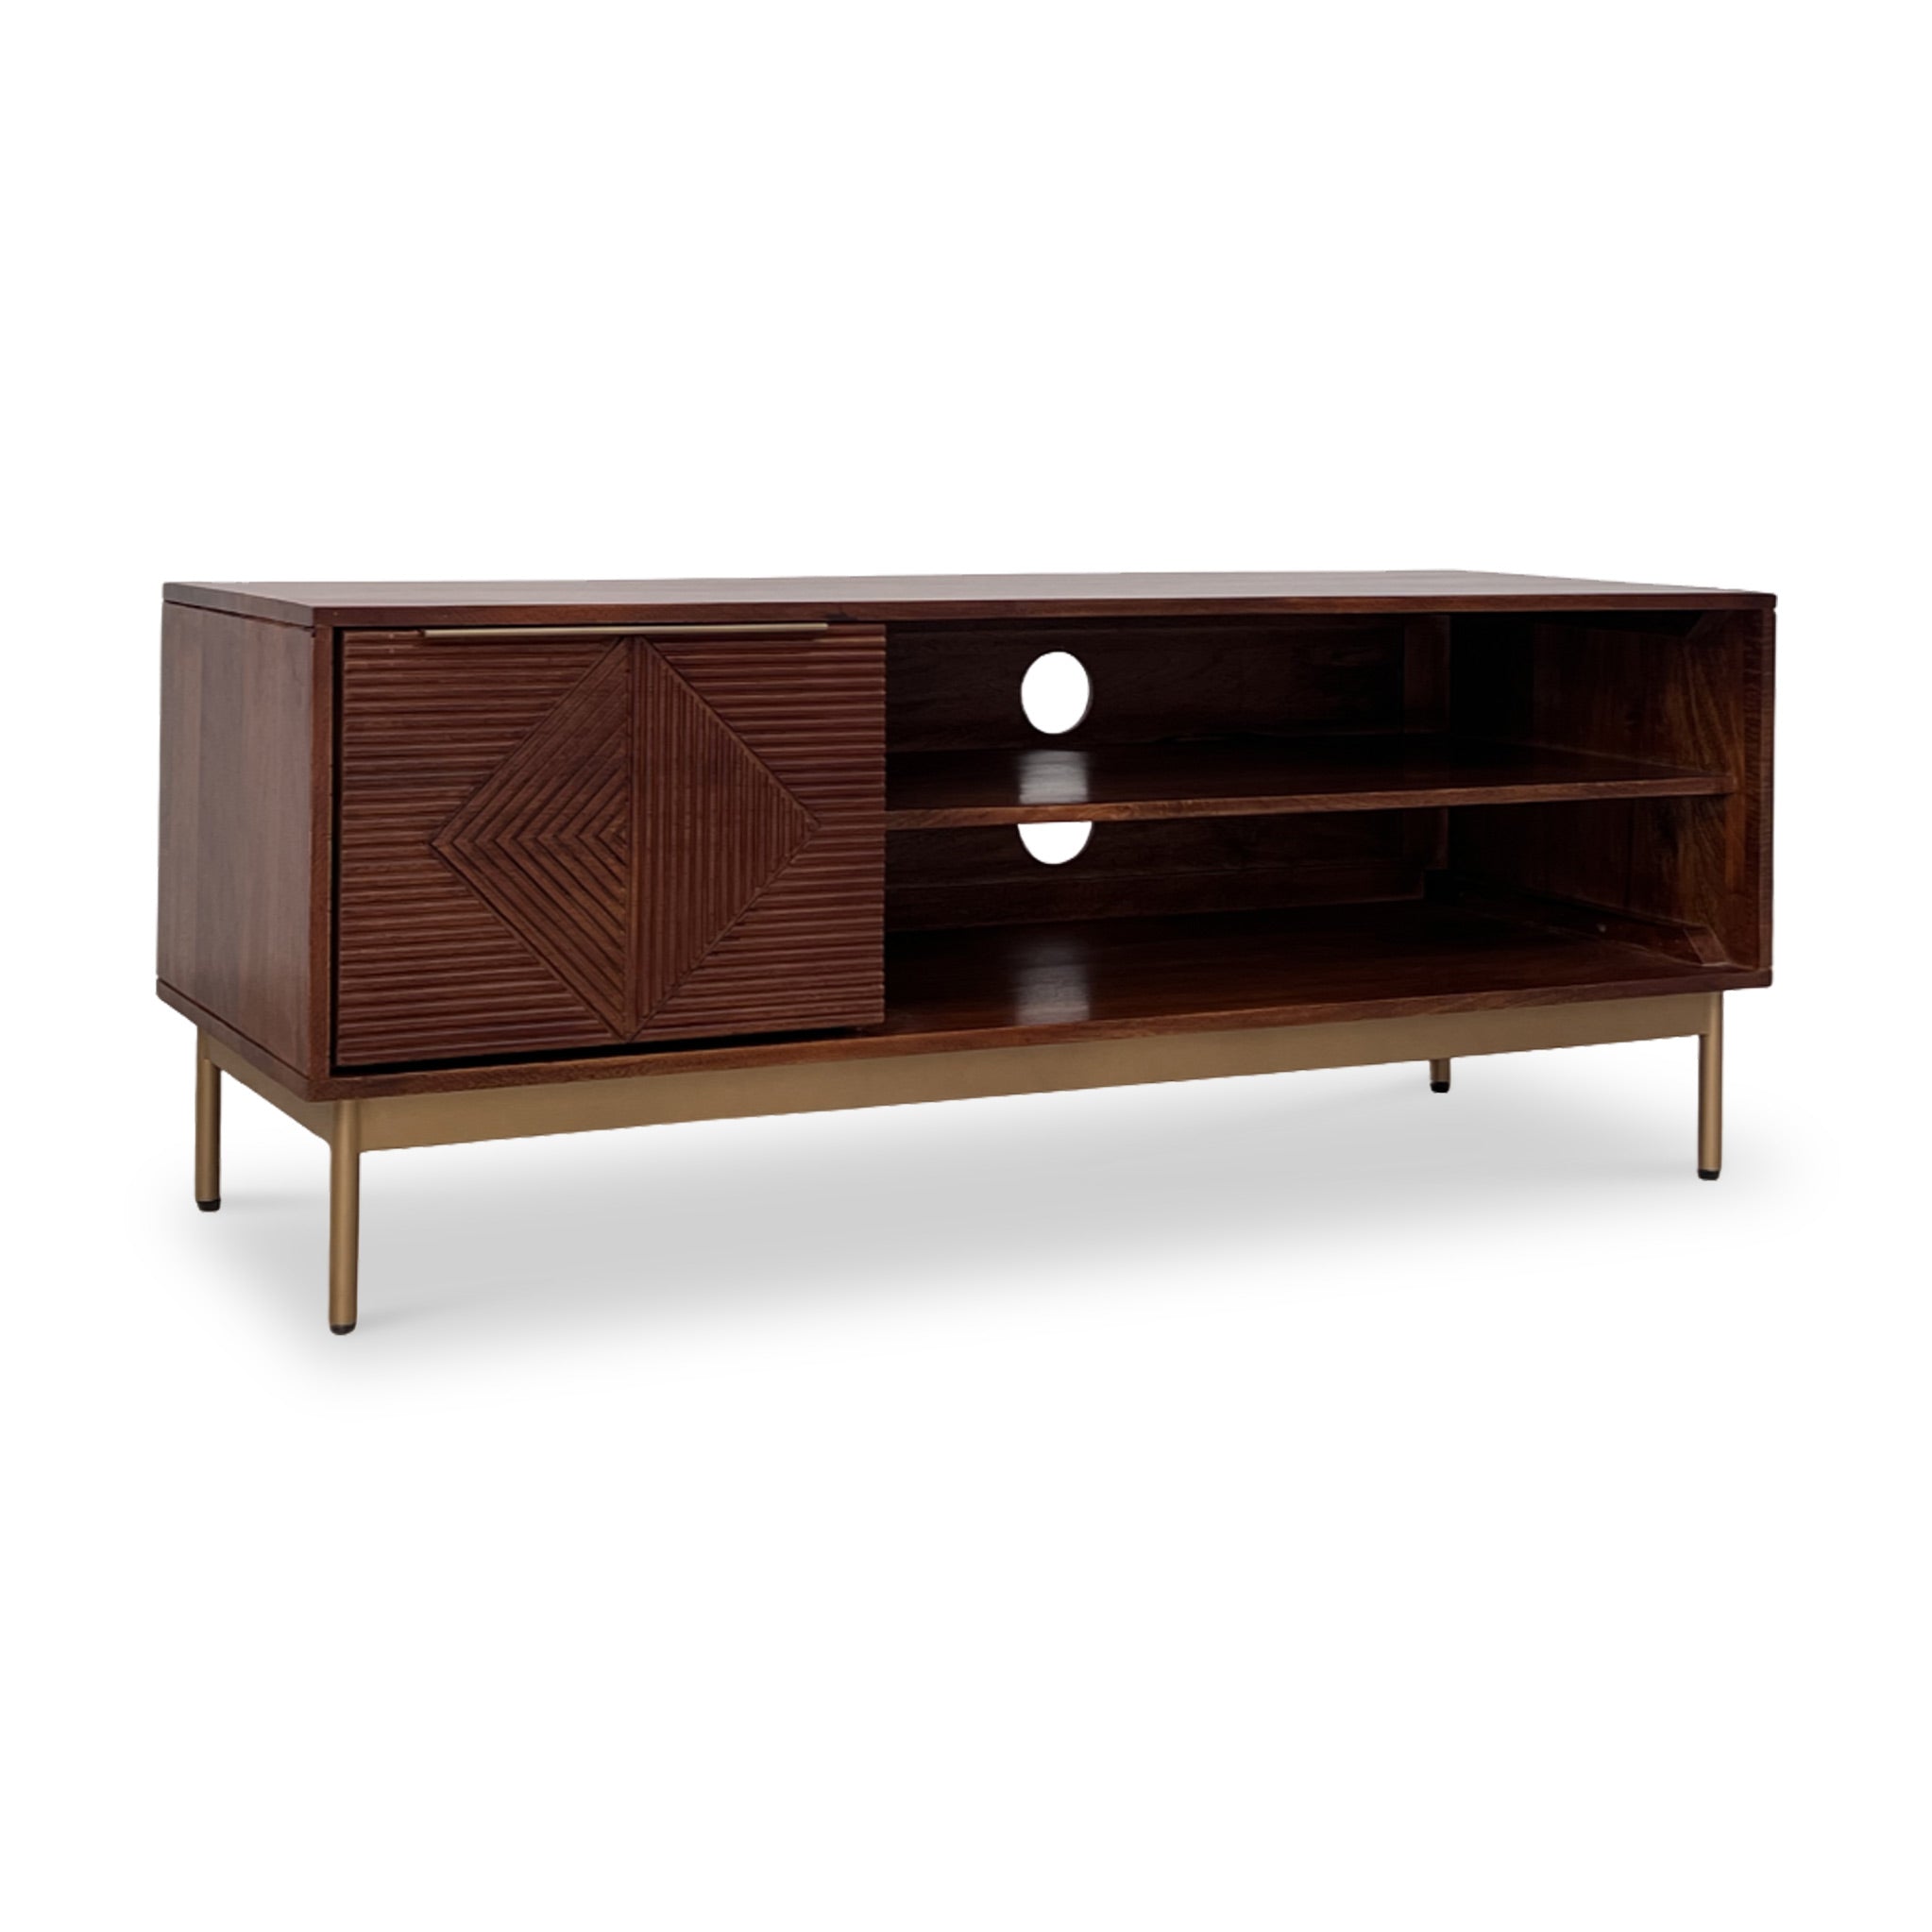 Beau Grooved Mango Wood Tv Unit Stand For Living Room Roseland